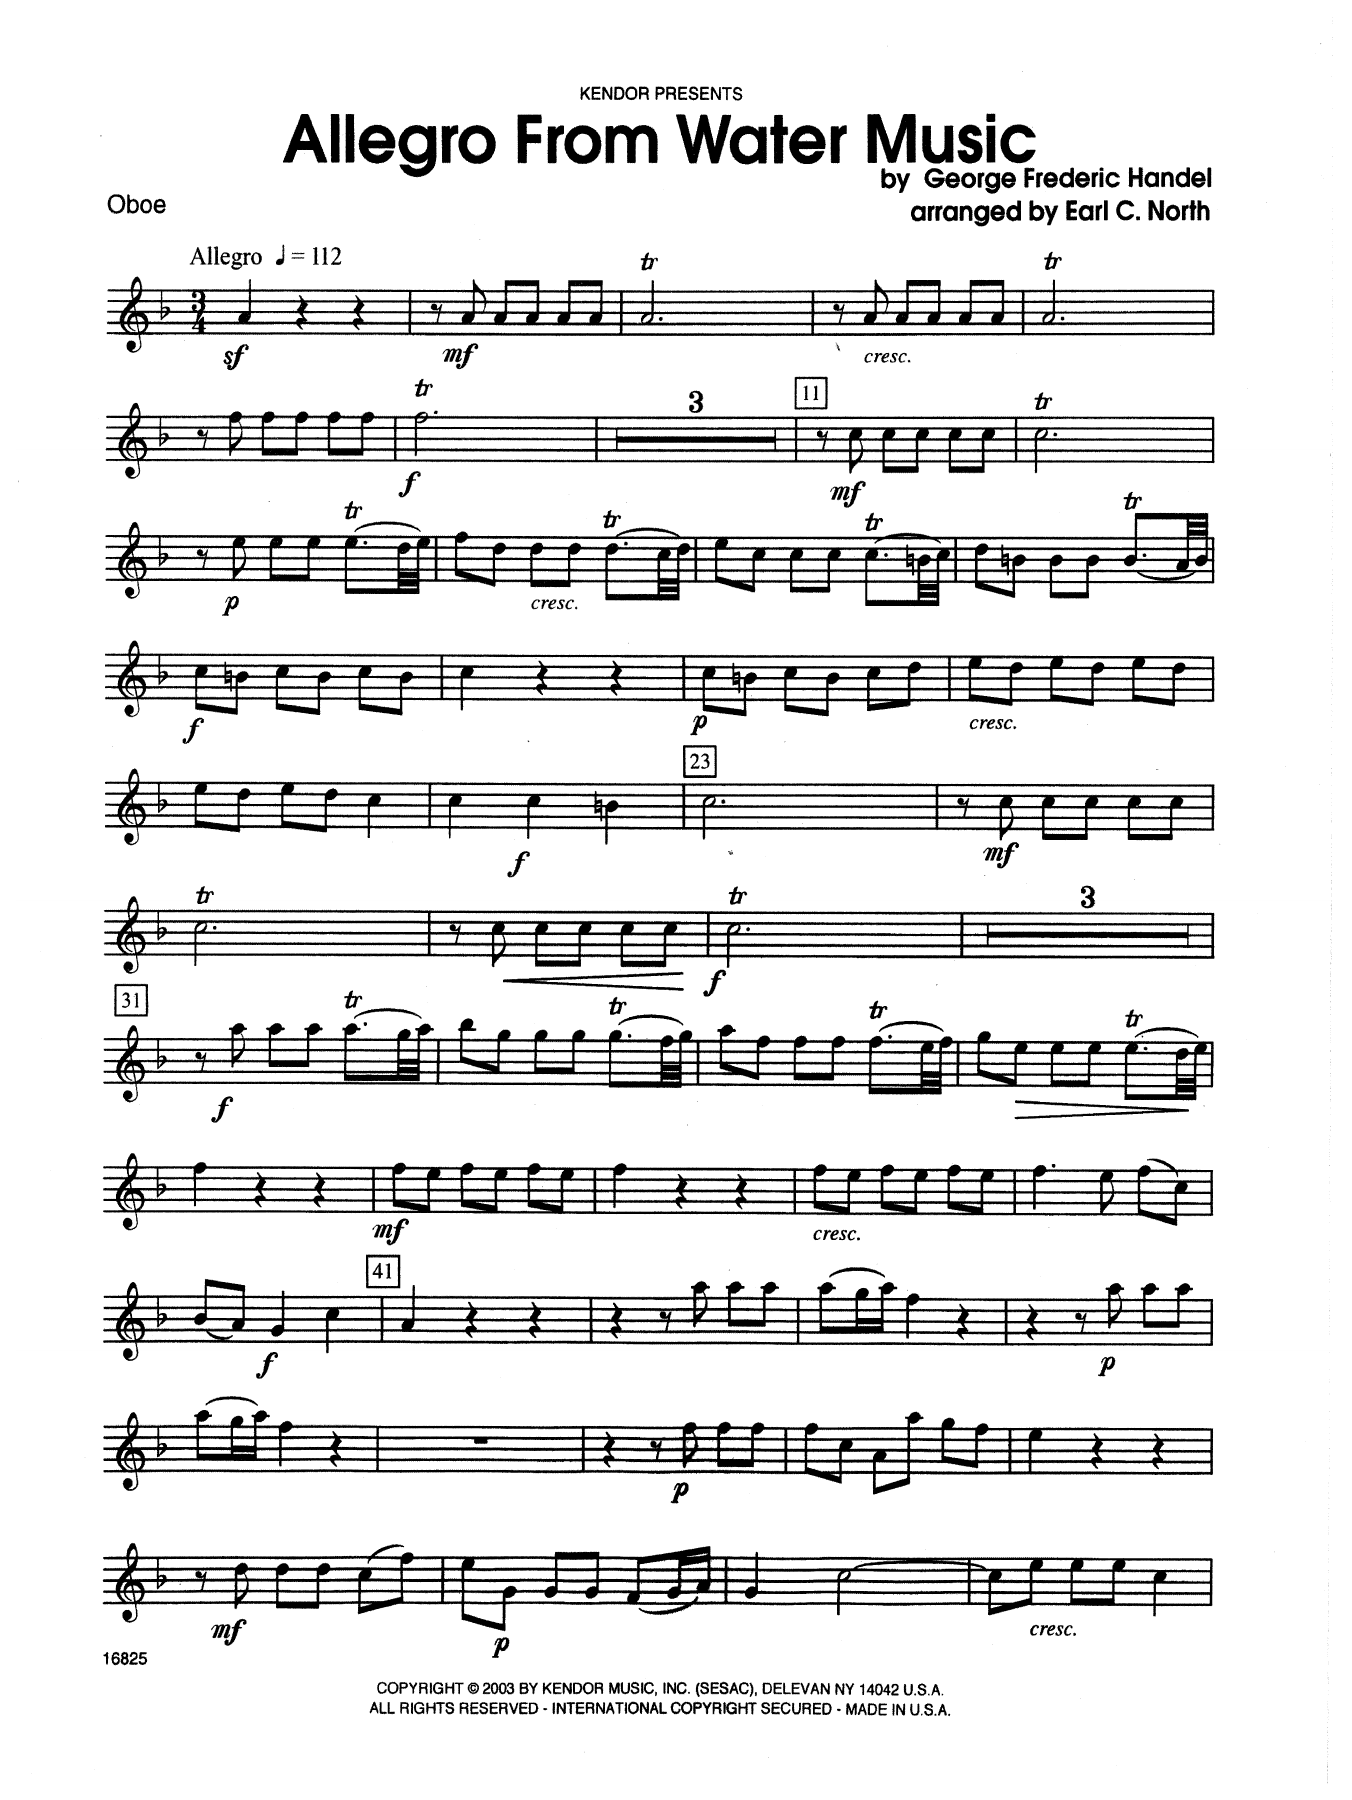 Earl North Allegro From Water Music - Oboe sheet music notes and chords. Download Printable PDF.